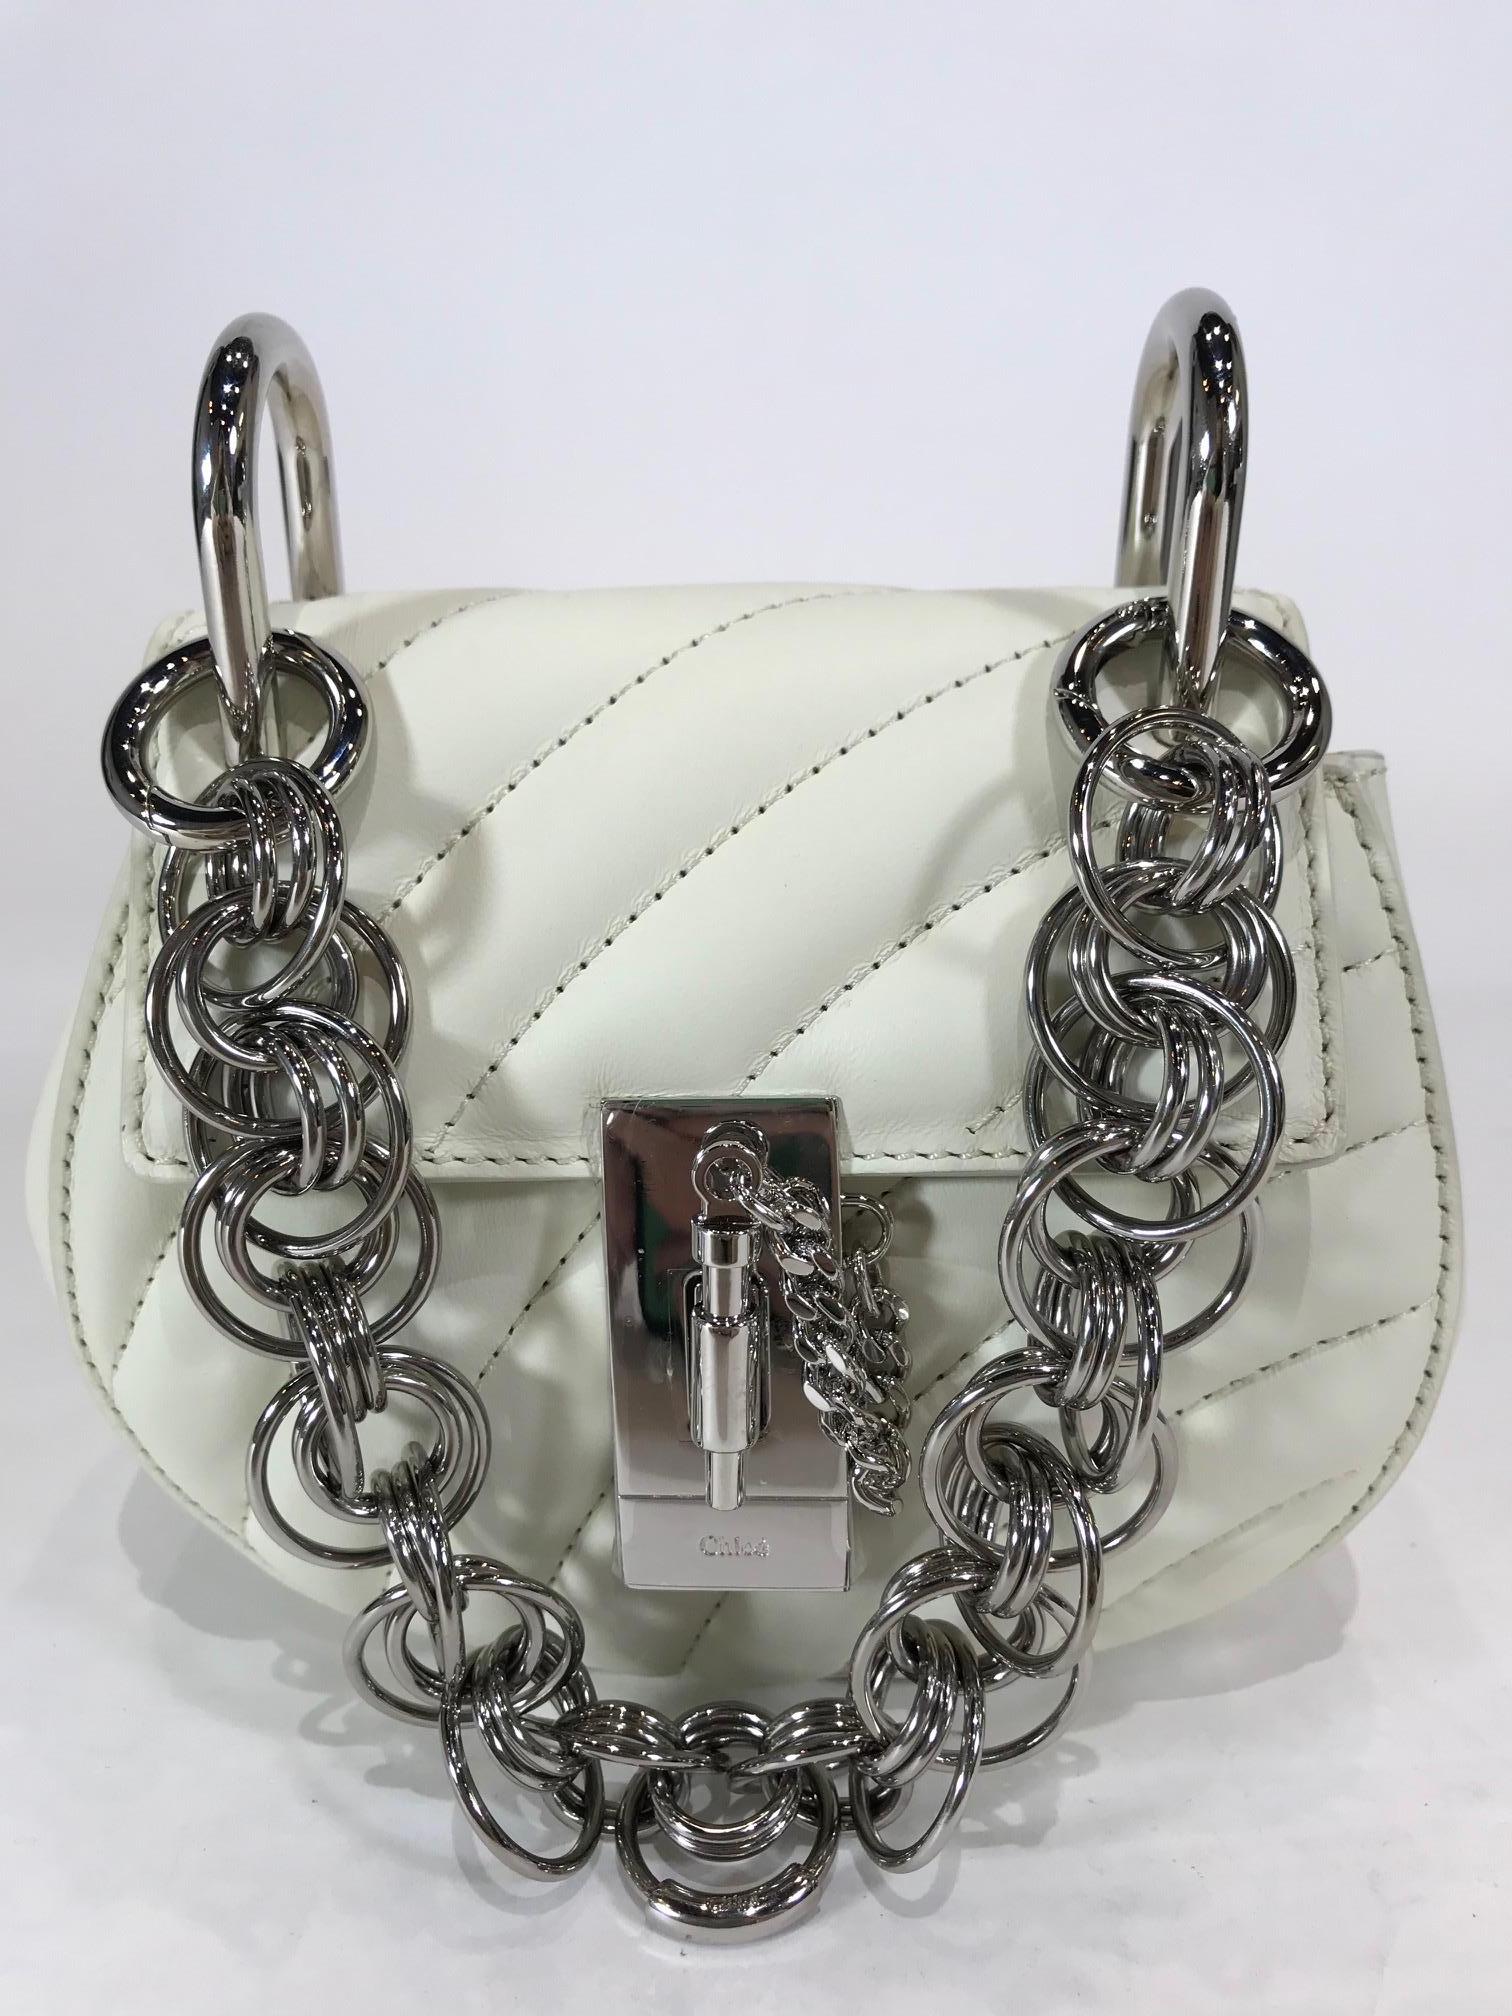 White Quilted Leather. Silver-tone hardware. Pin and clasp-fastening at front flap closure. Features bracelet-inspired chain-link handle, Beige suede interior with slip pocket. Estimated Retail Price: $1,590